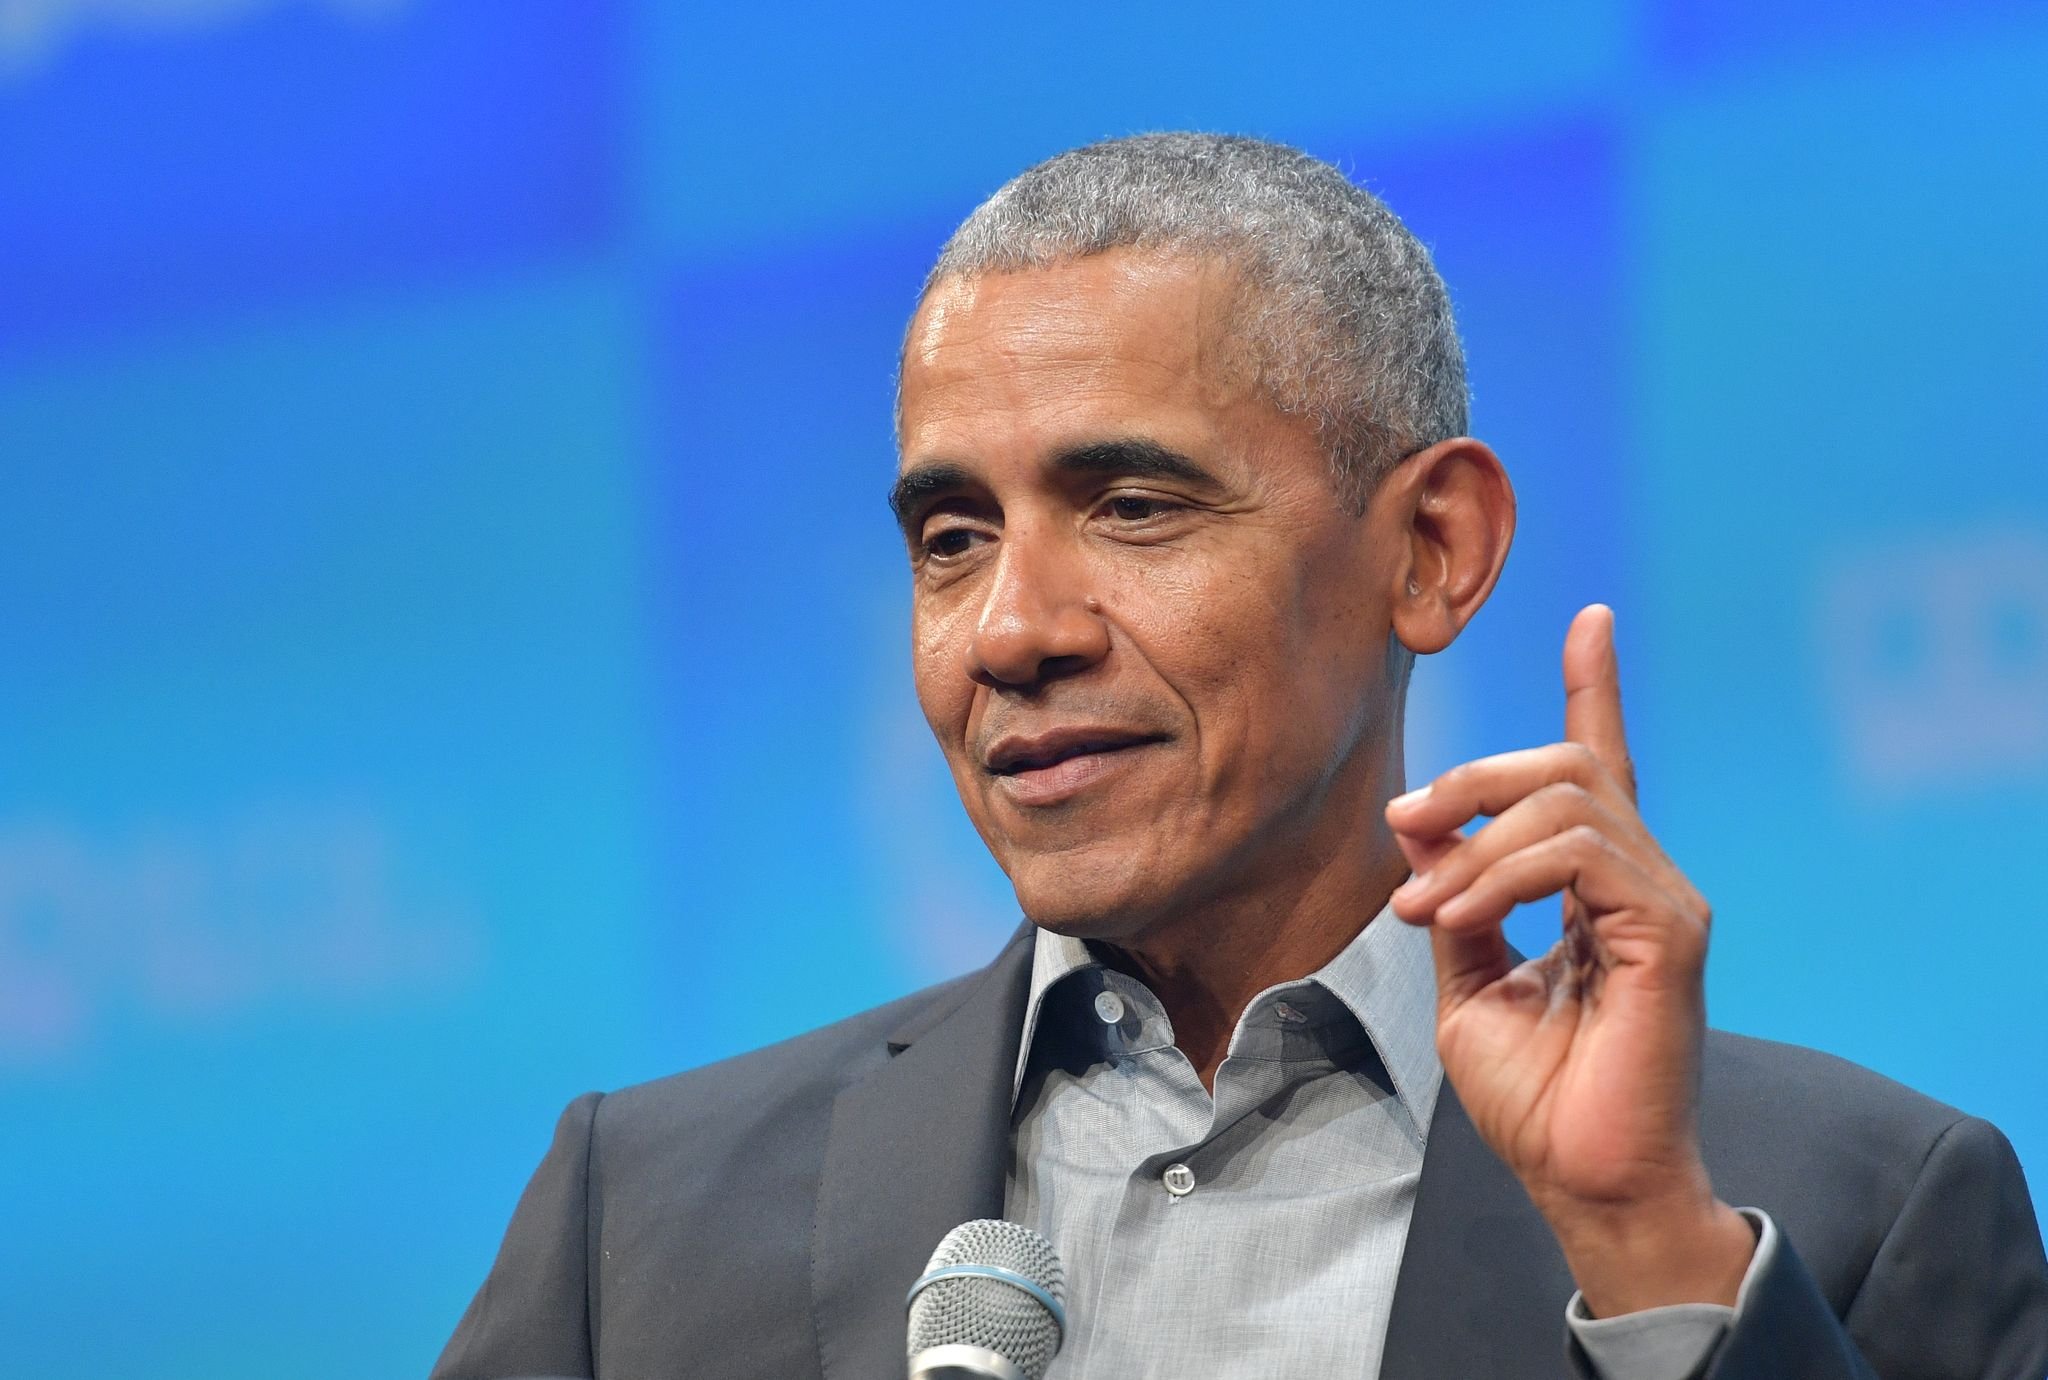 Barack Obama during the opening of the Bits & Pretzels meetup on September 29, 2019 in Munich, Germany. | Source: Getty Images